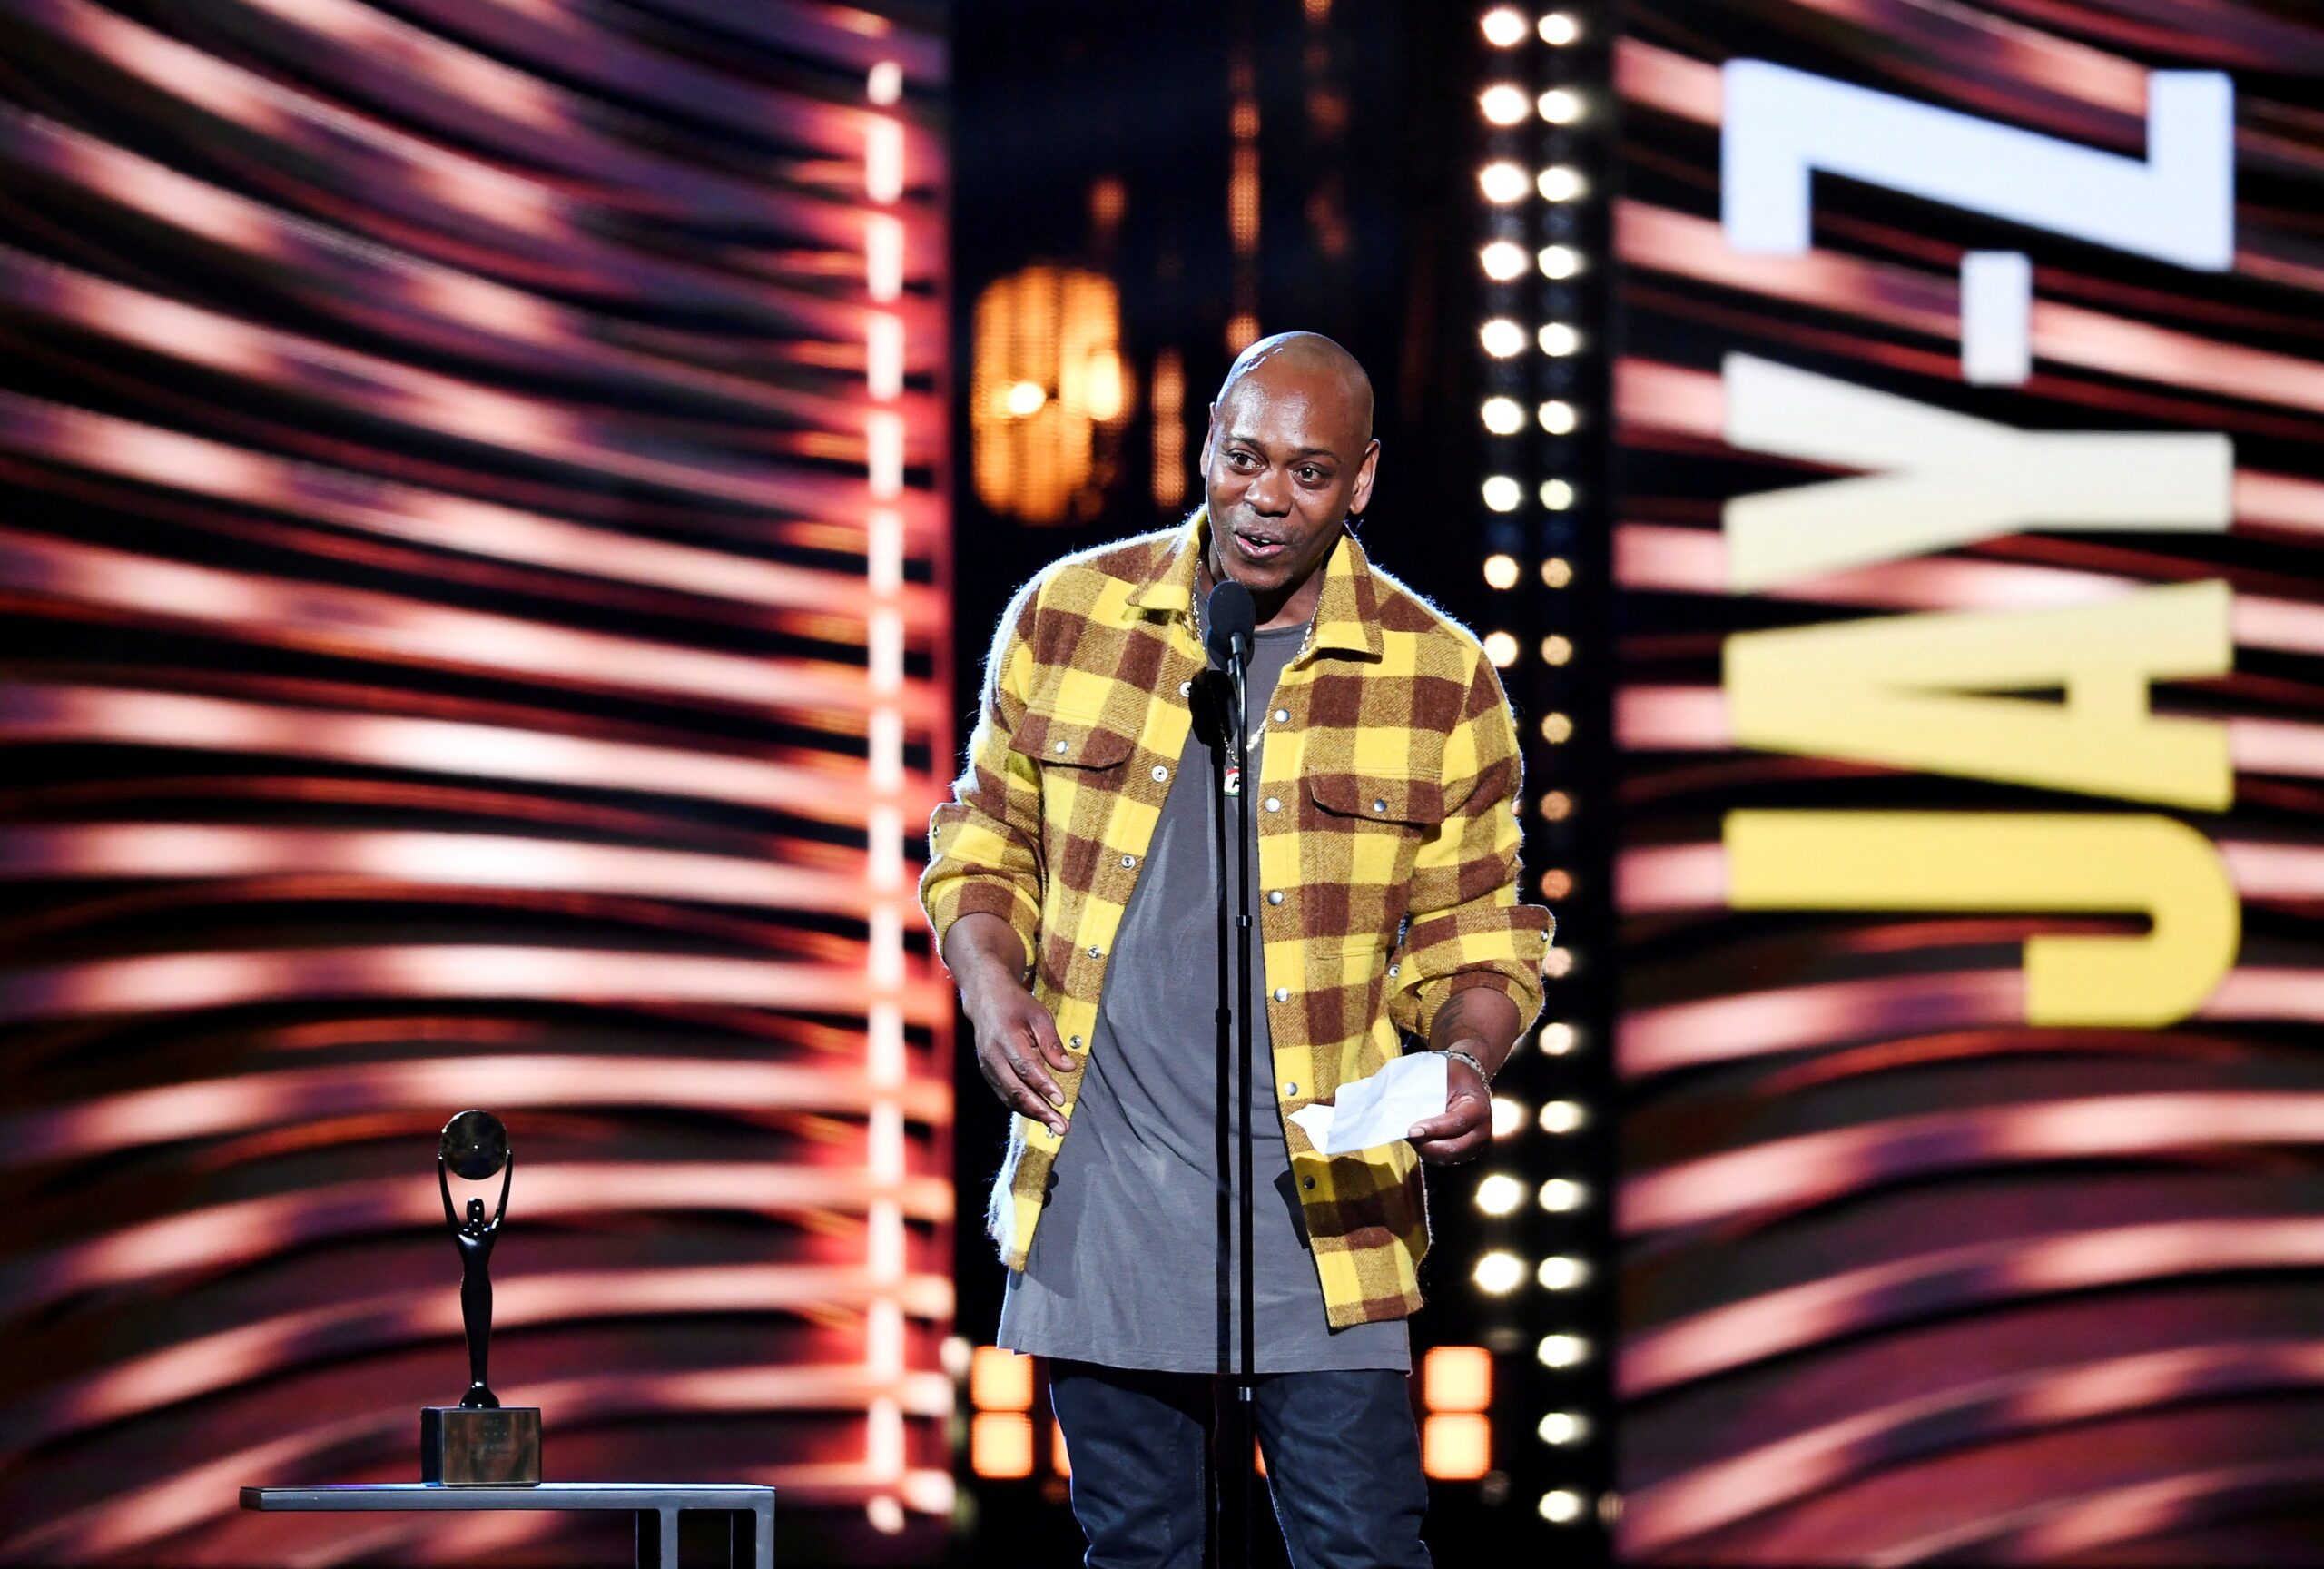 Dave Chappelle tackled on stage at Hollywood Bowl – reports